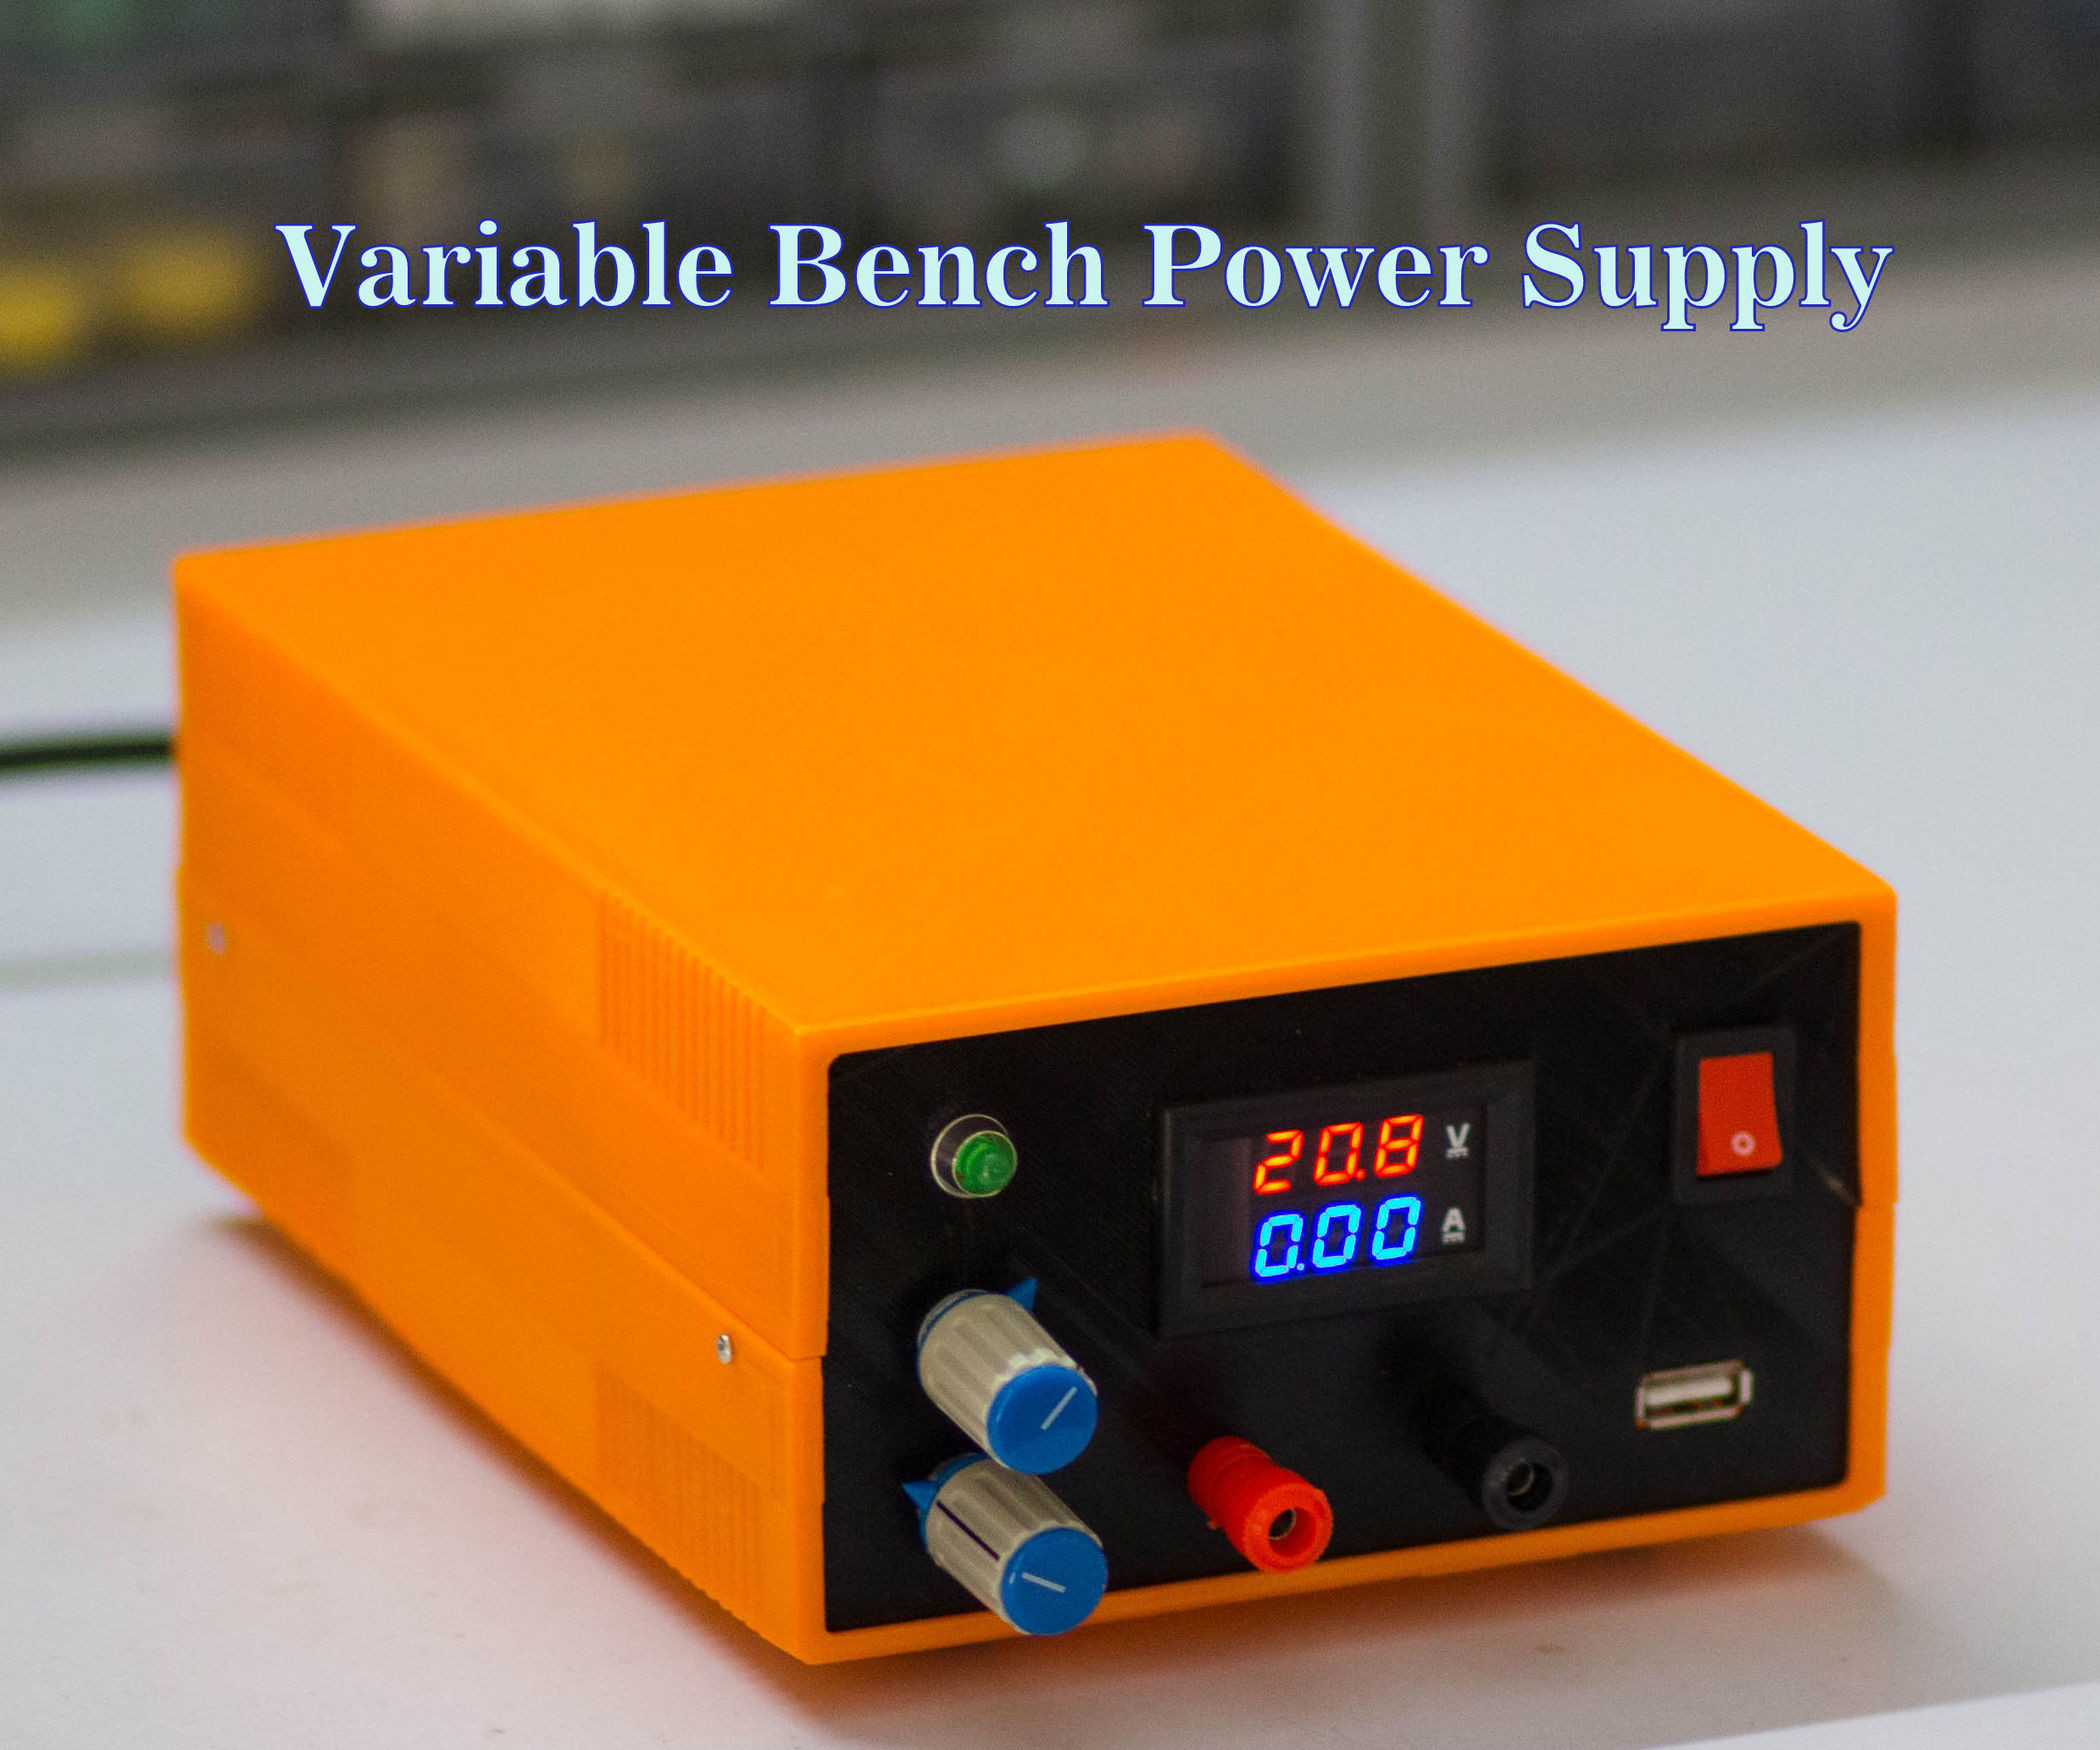 DIY Bench Power Supply Kit
 How to Make a Bench Power Supply 20 Steps with